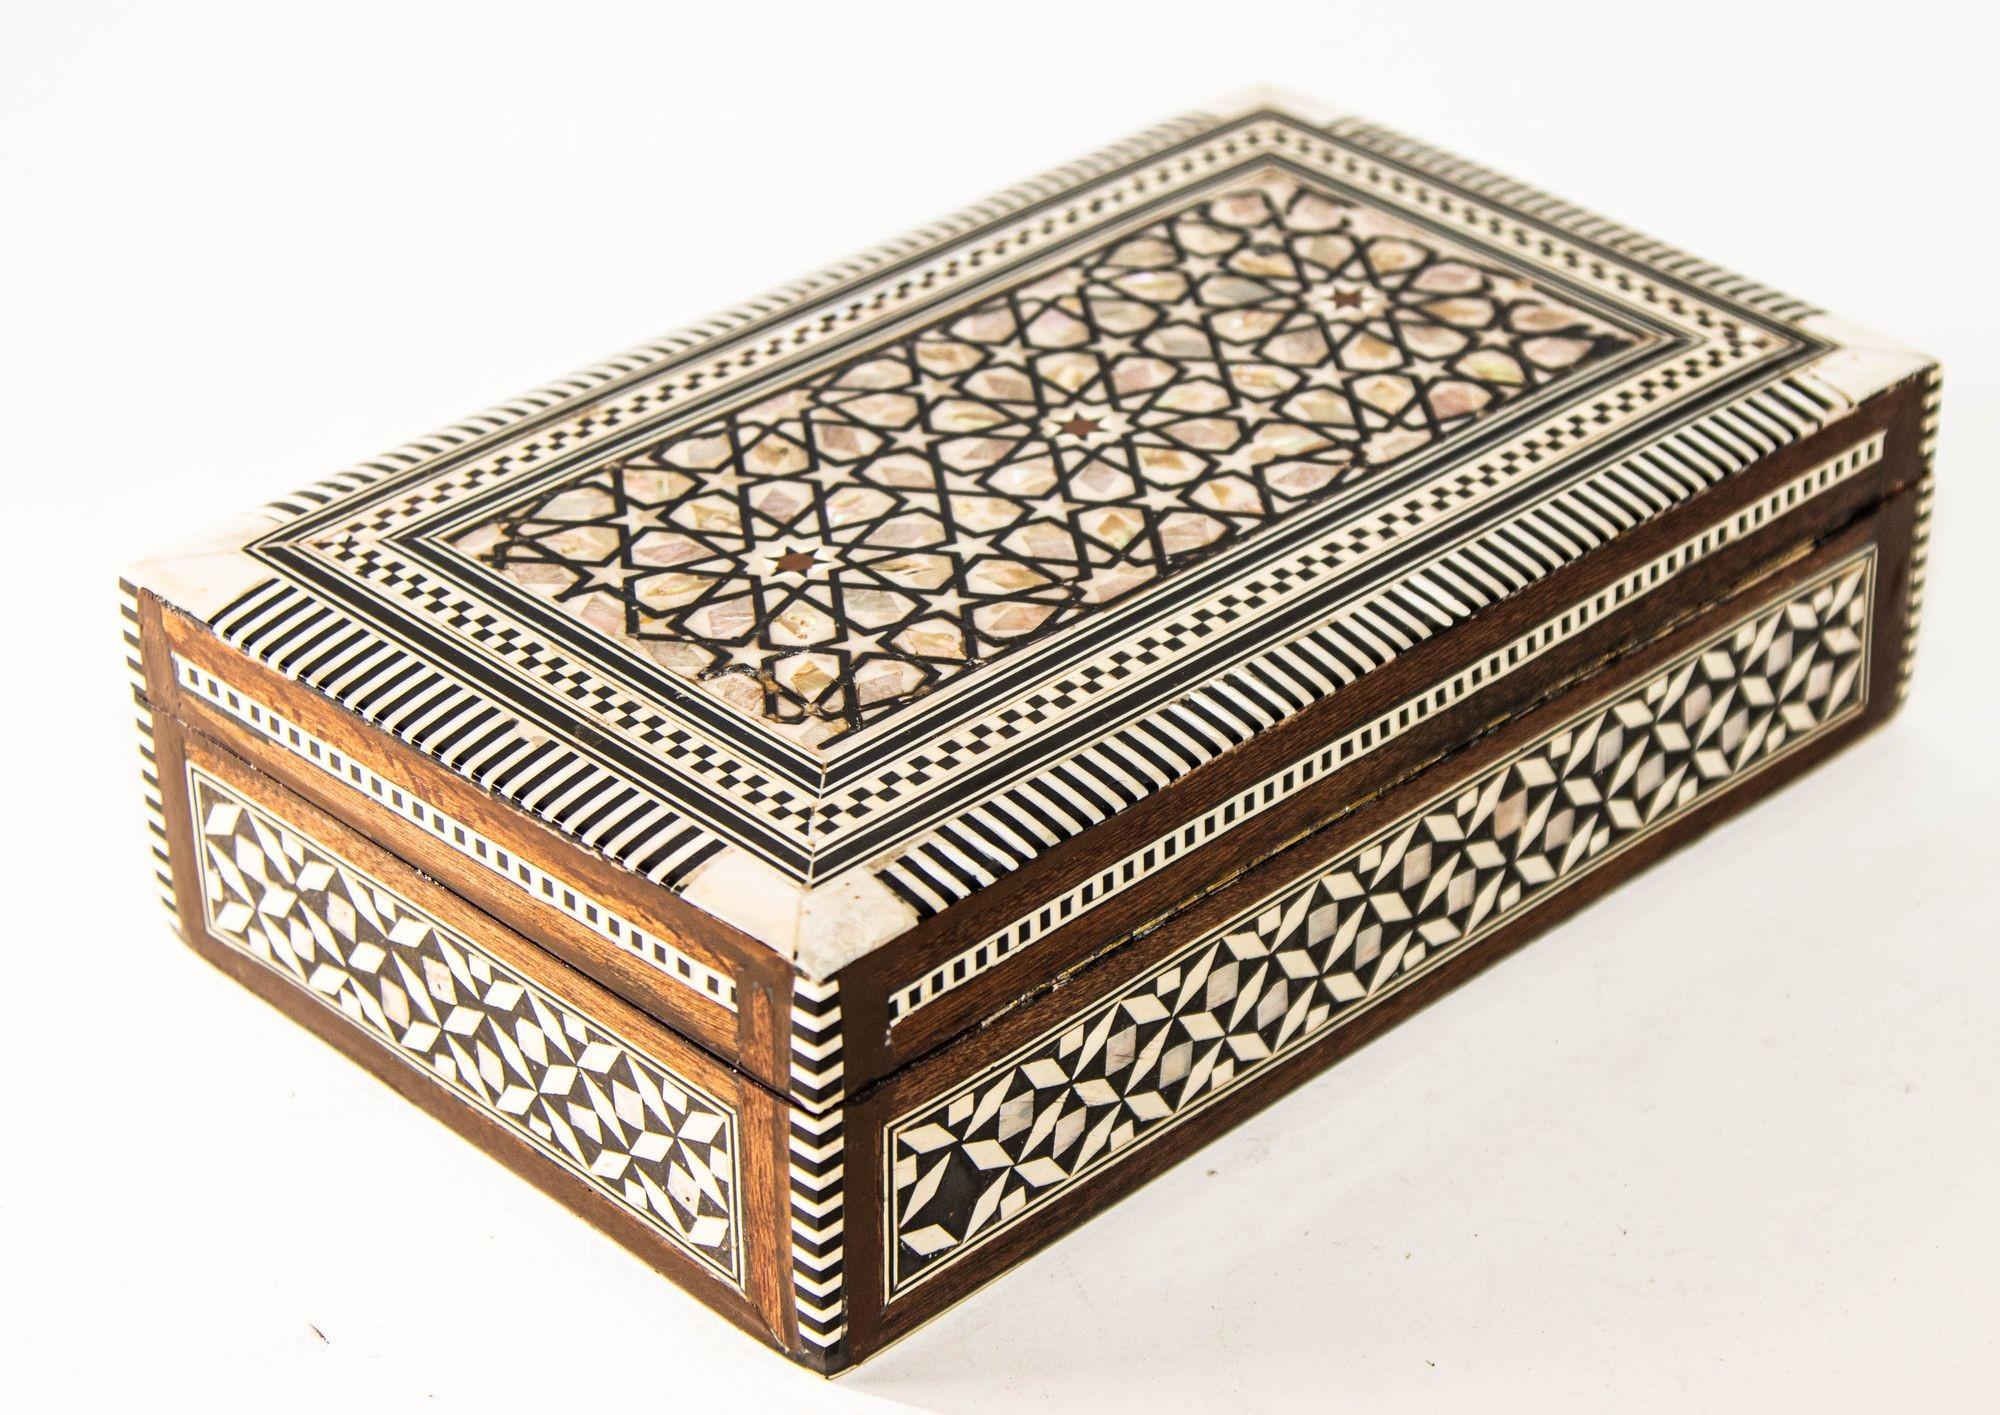 20th Century 1950s Mosaic Mother of Pearl Inlaid Decorative Middle Eastern Islamic Box